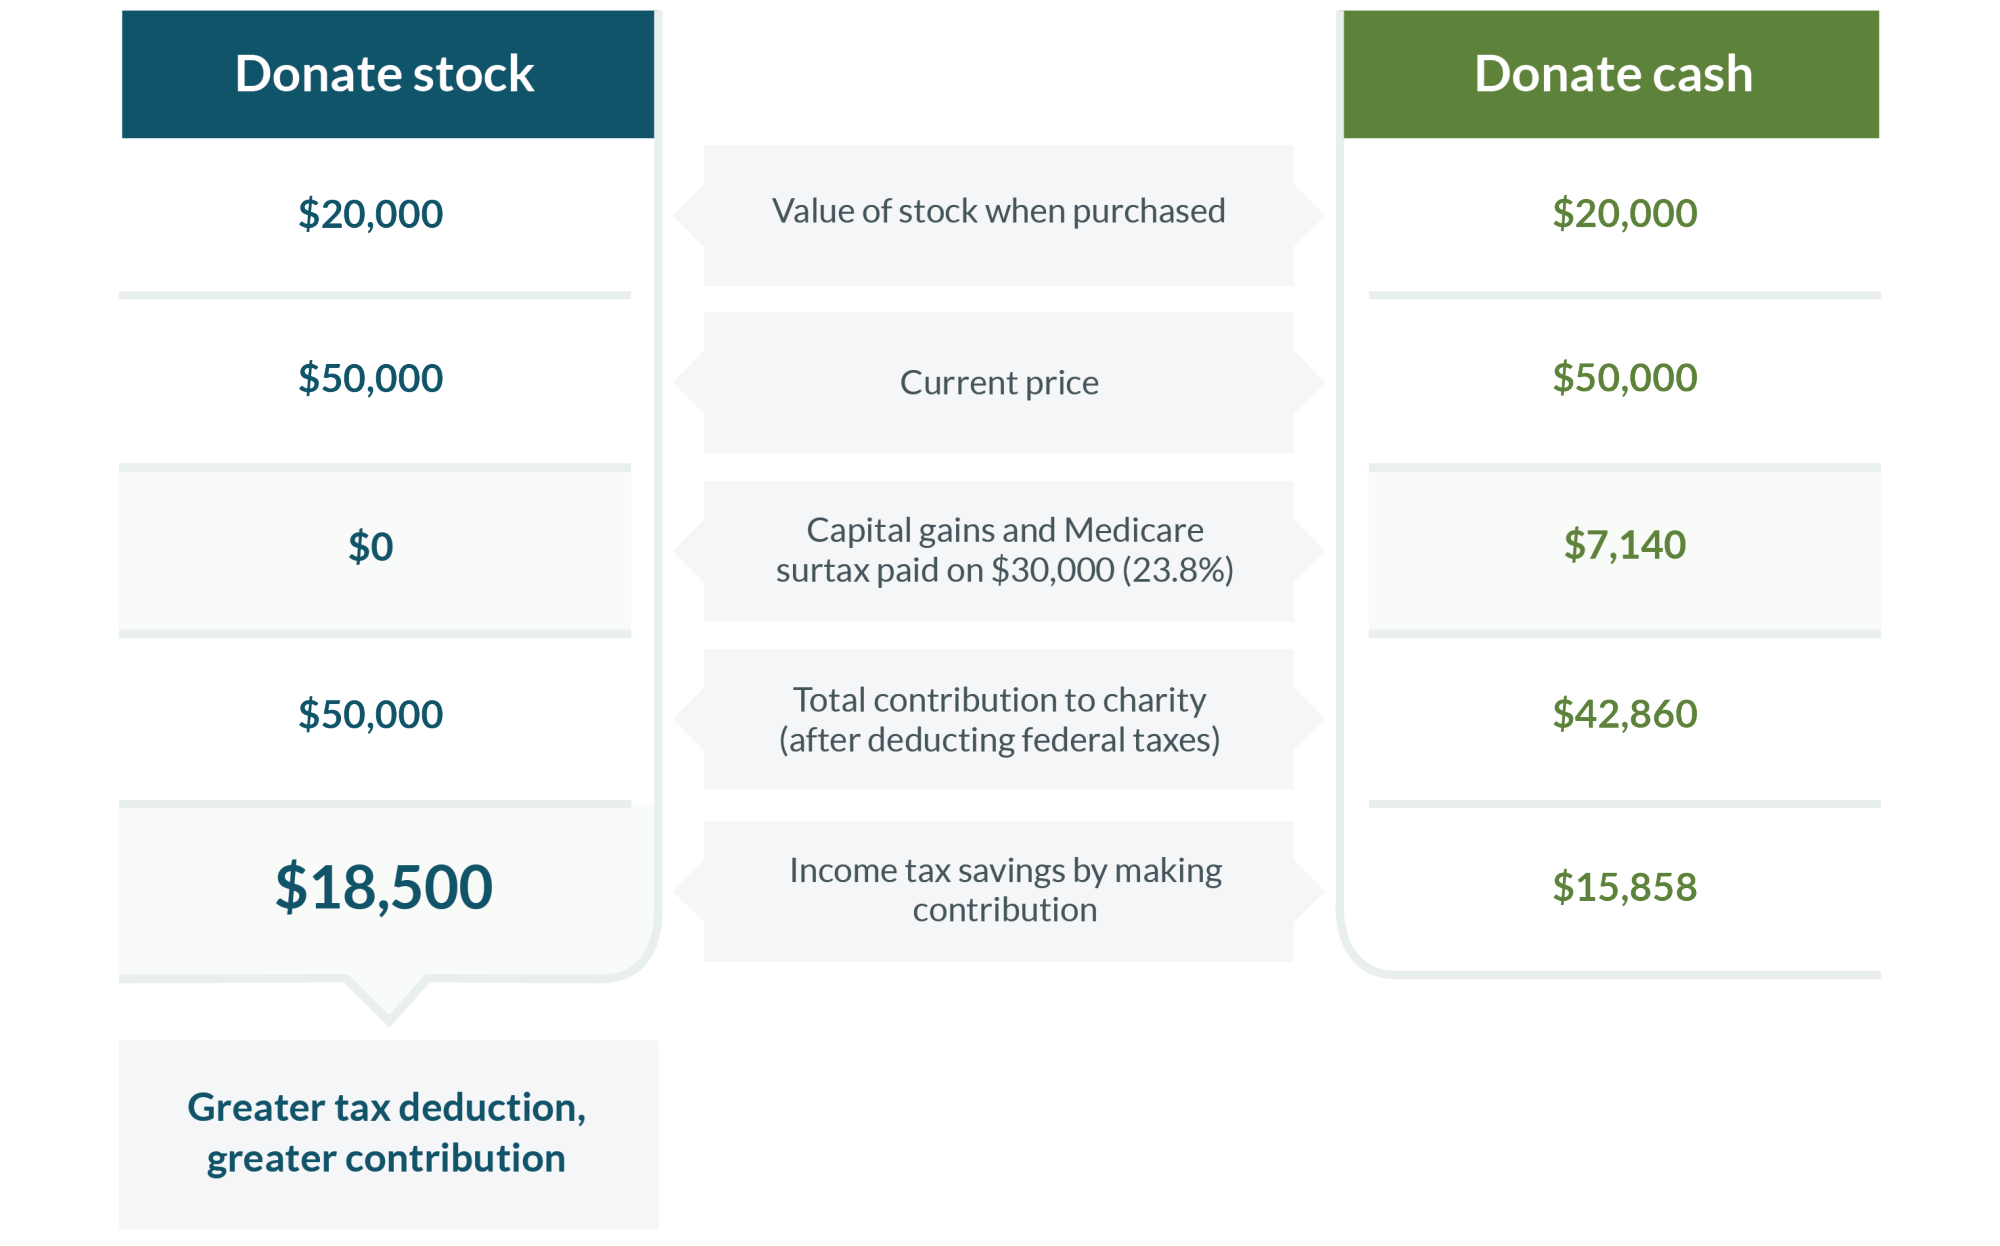 Example of a charitable donation may help to reduce tax cost of conversion